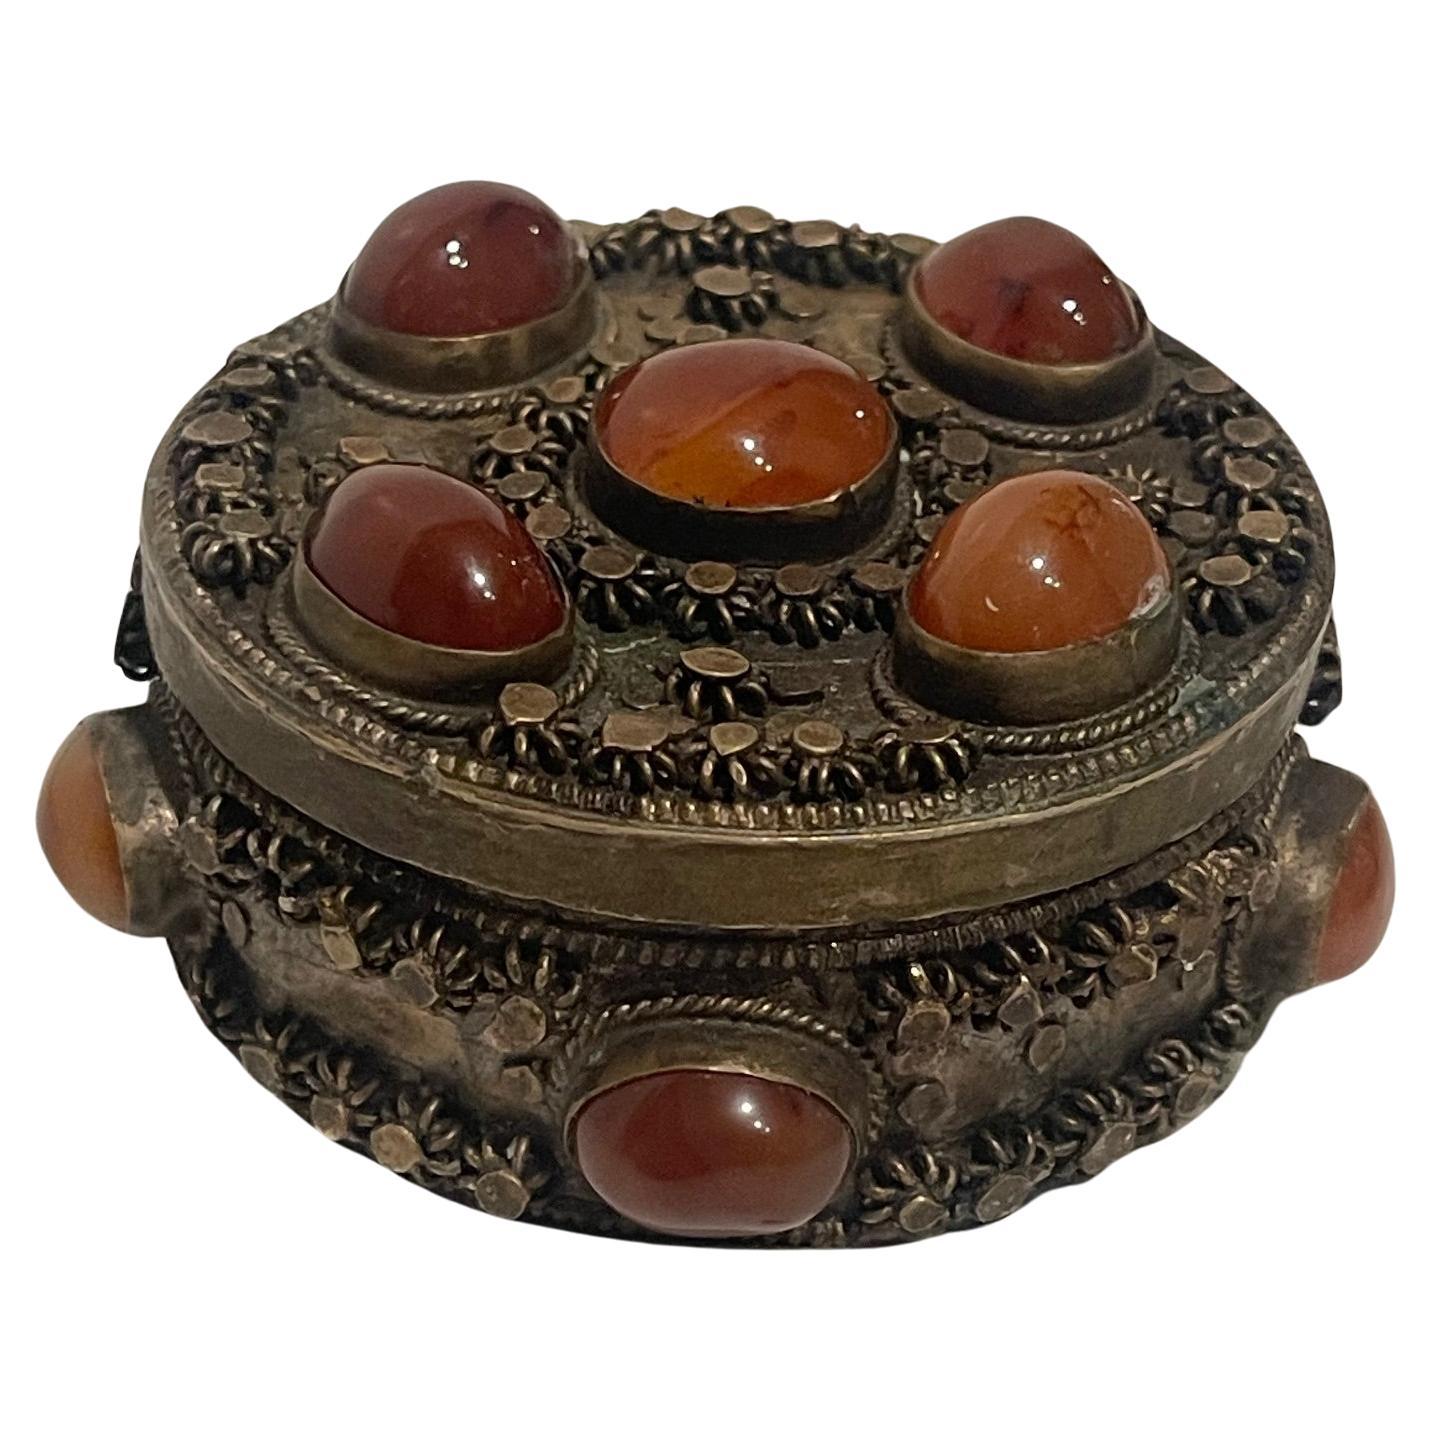 Vintage Round Box with Agate Stones, 20th Century